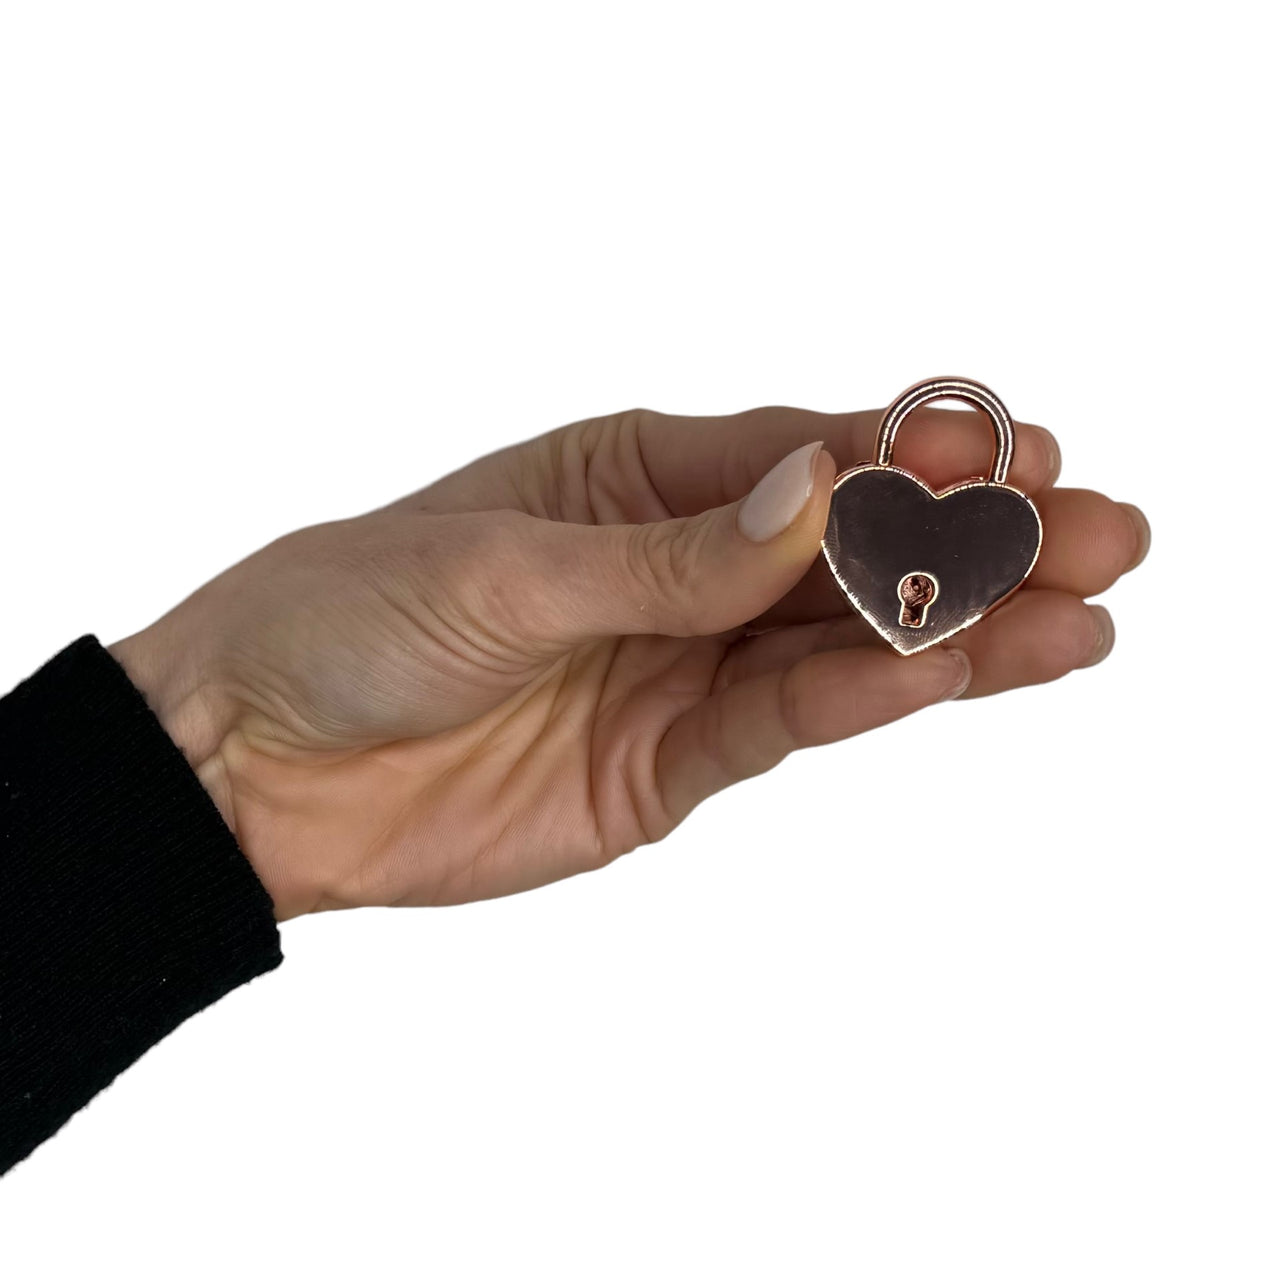 Elegant Heart-Shaped Lock in Rose Gold, Gold, or Silver Symbolic BDSM Accessory